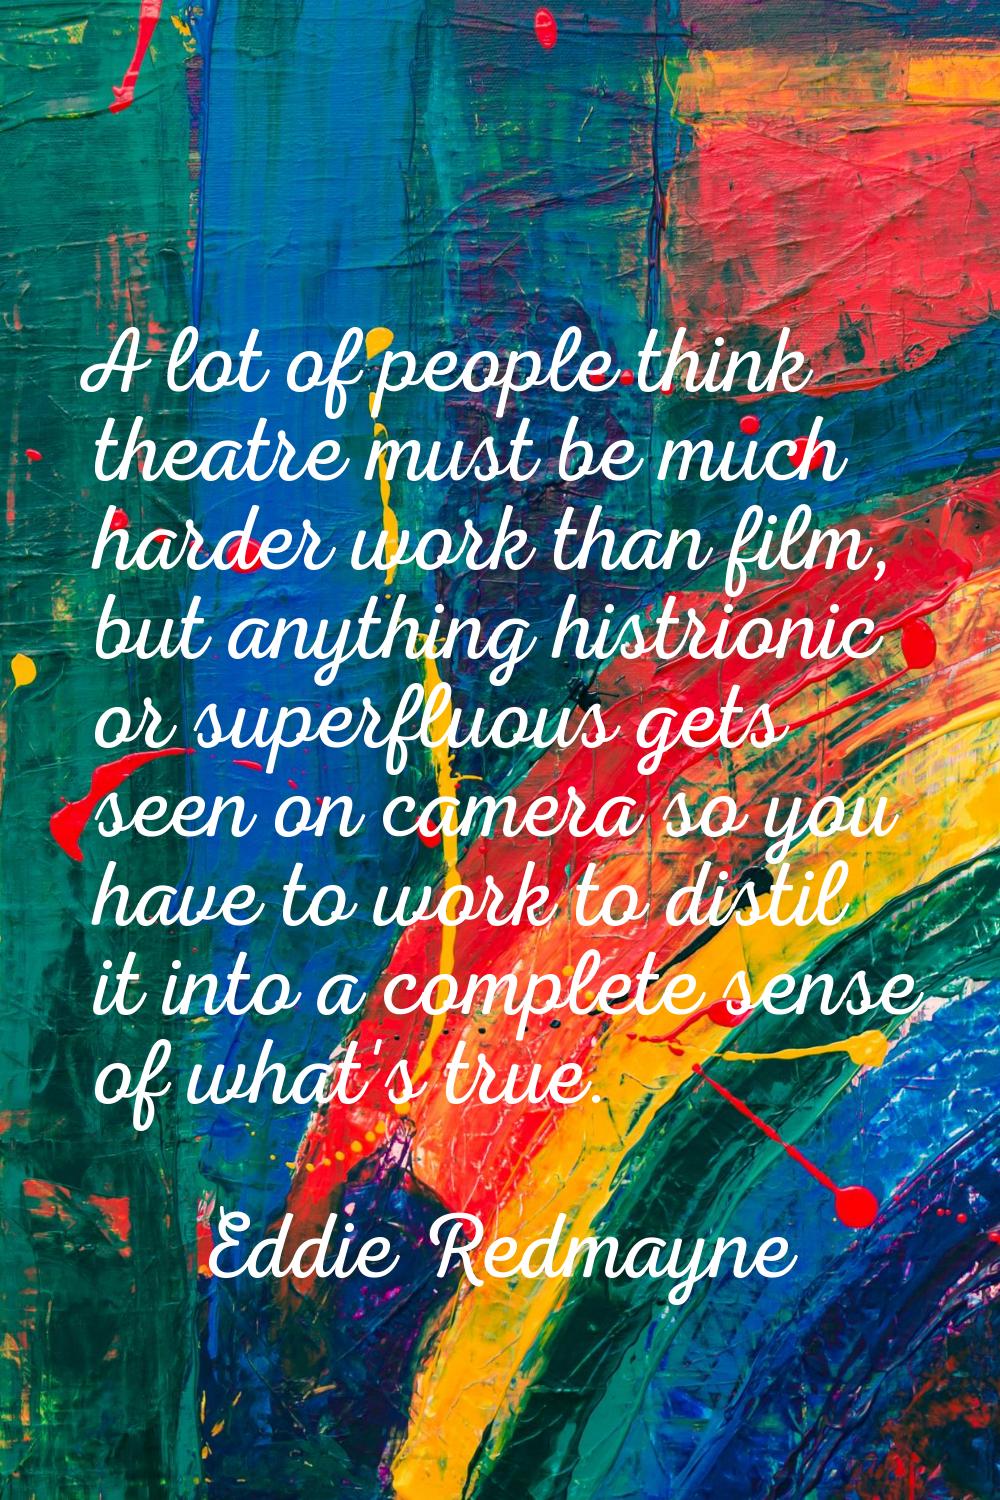 A lot of people think theatre must be much harder work than film, but anything histrionic or superf